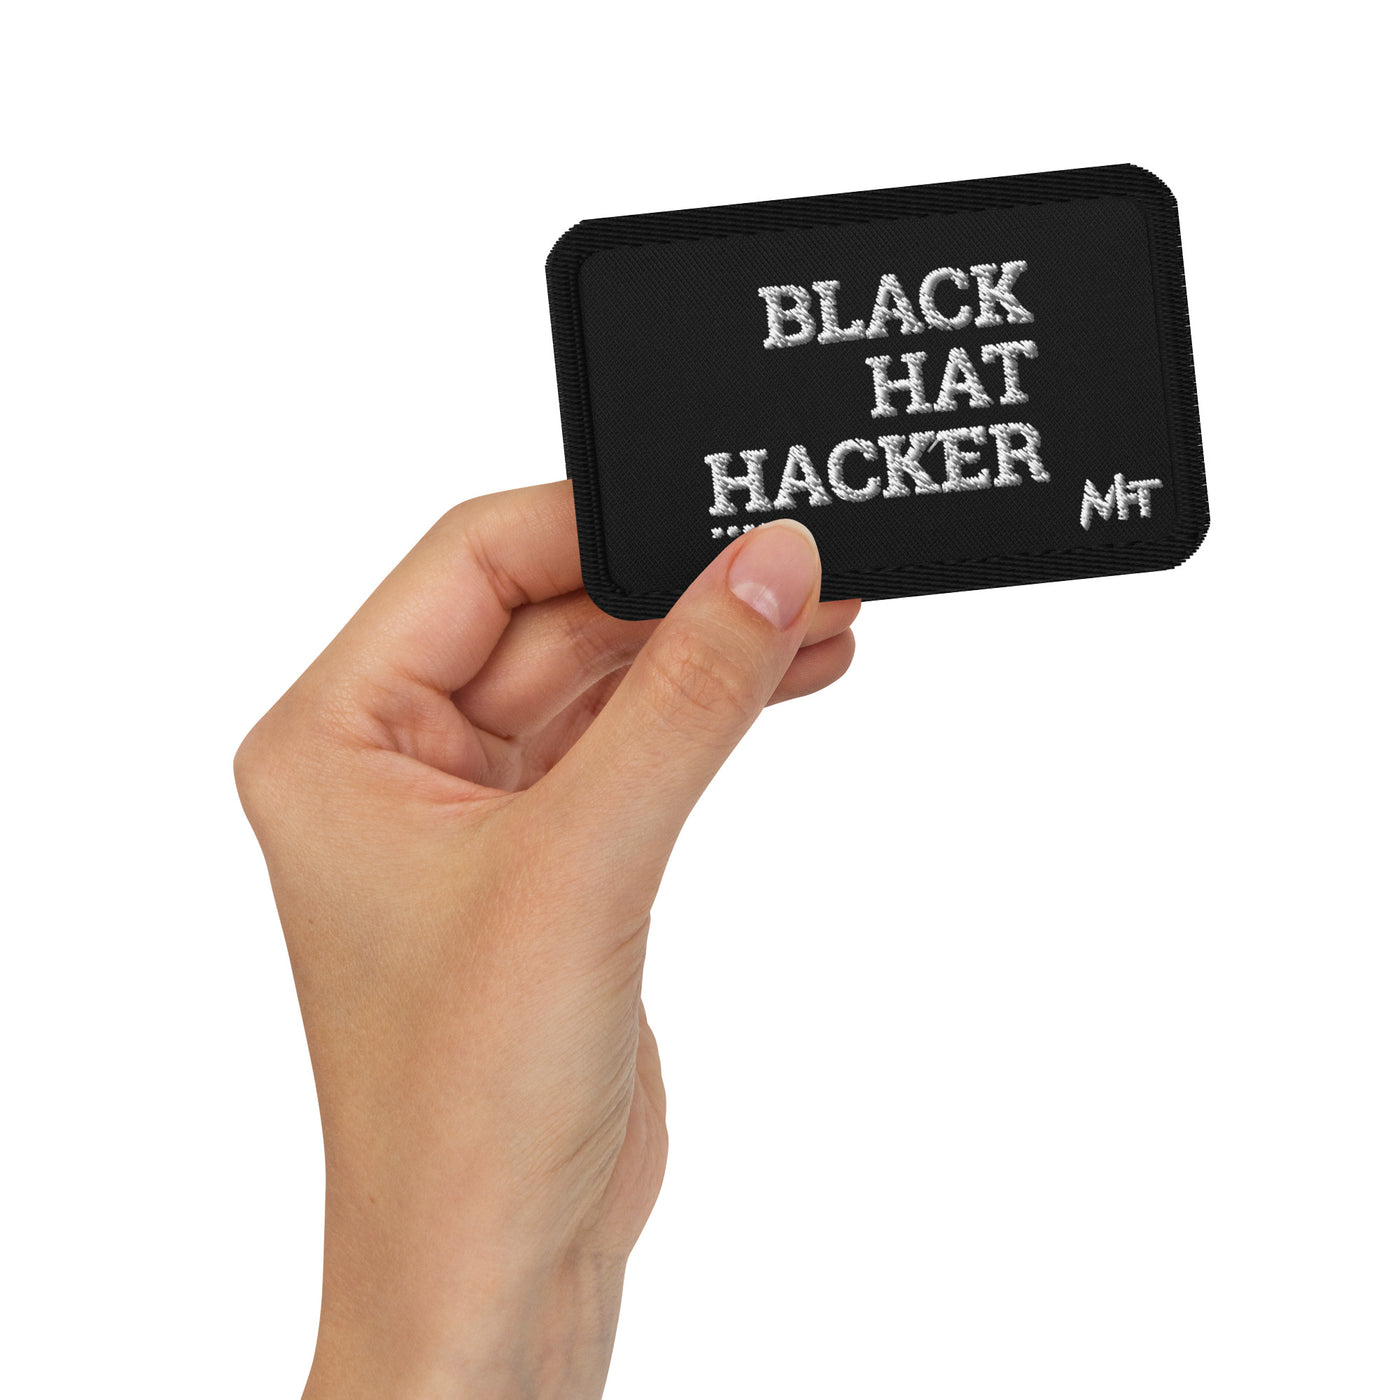 Black Hat Hacker V8 - Embroidered patches